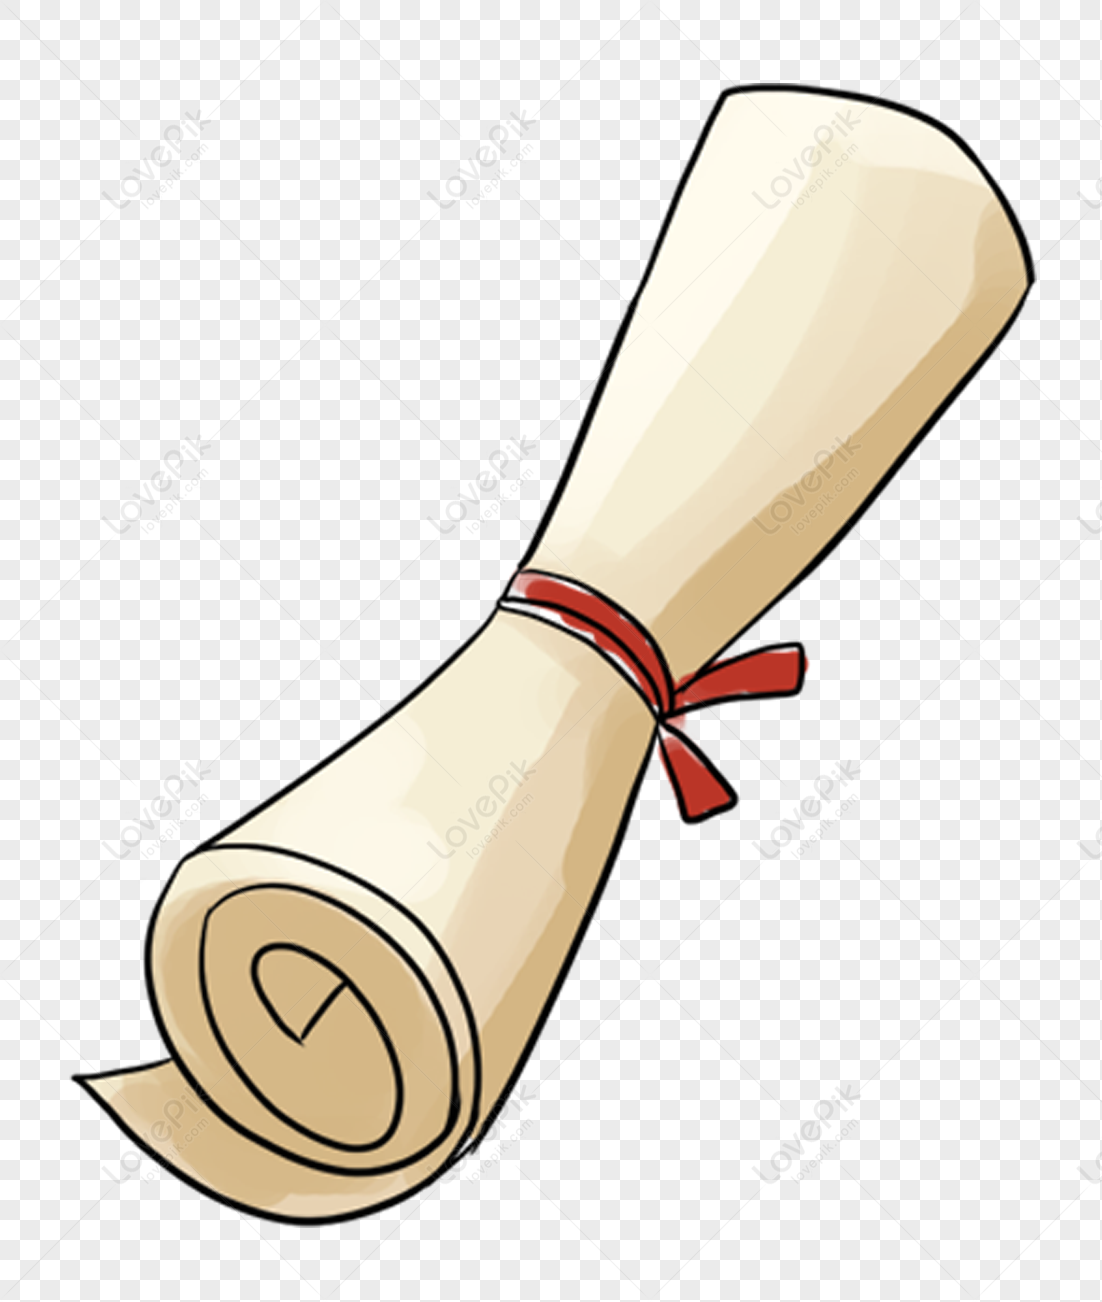 scroll background clipart